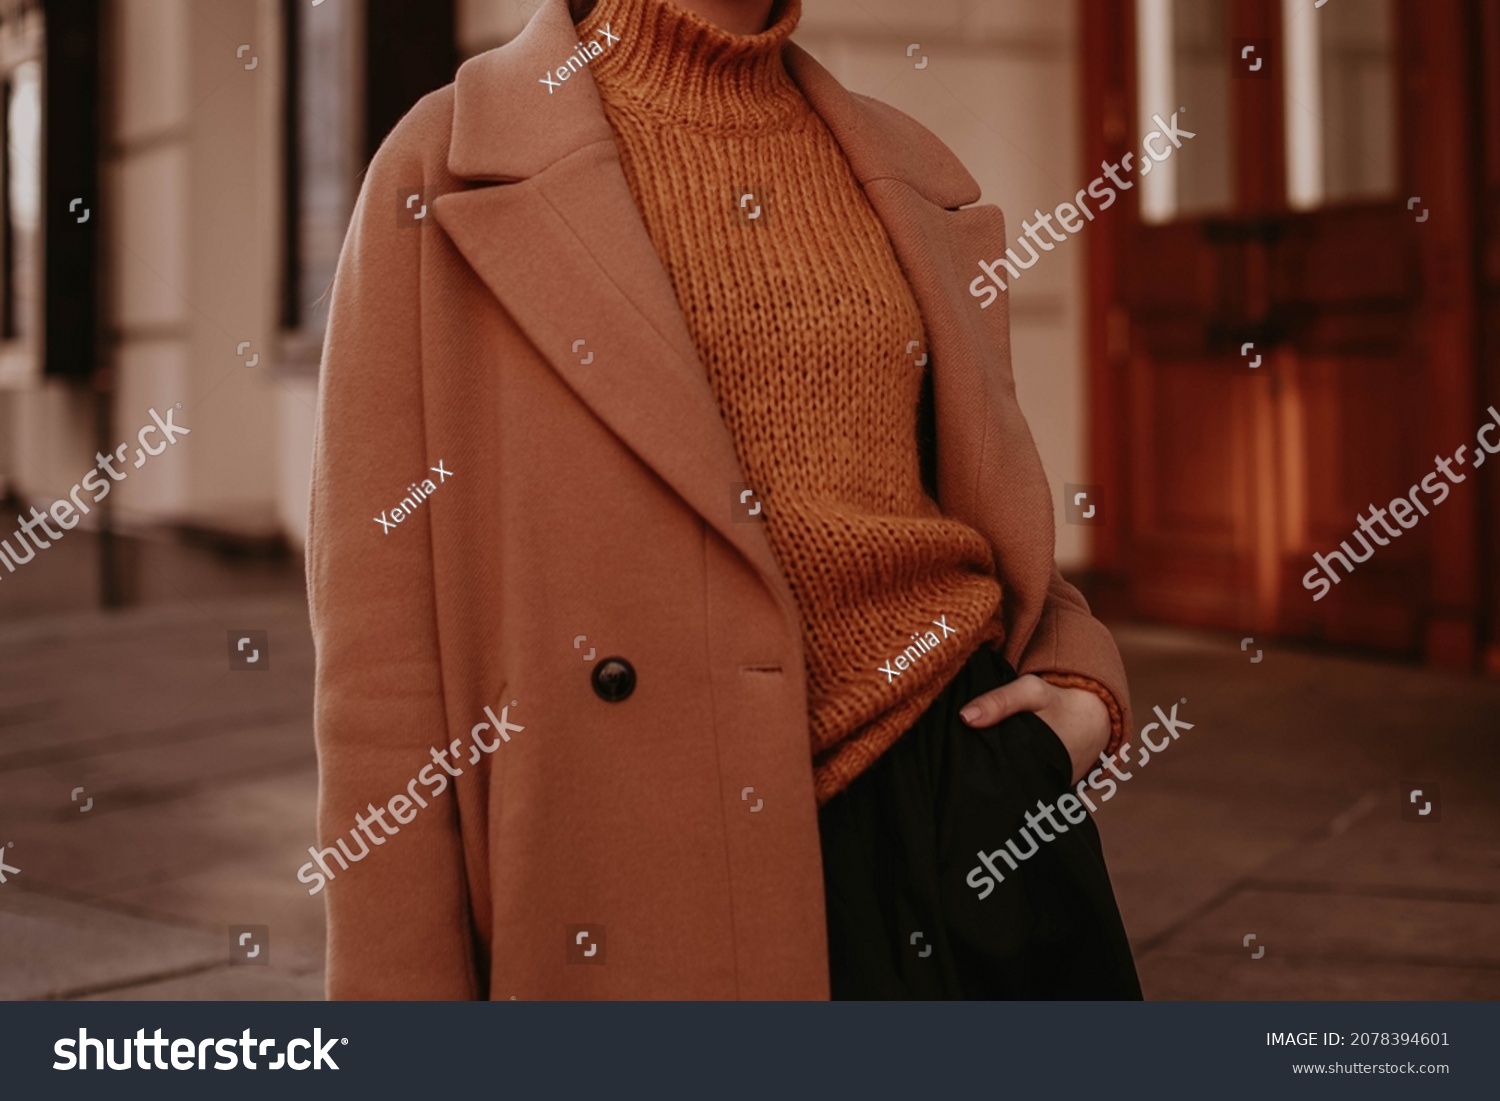 Cropped female figure in a brown cozy warm coat and knitted orange sweater. Street casual winter or autumn fashion. #2078394601